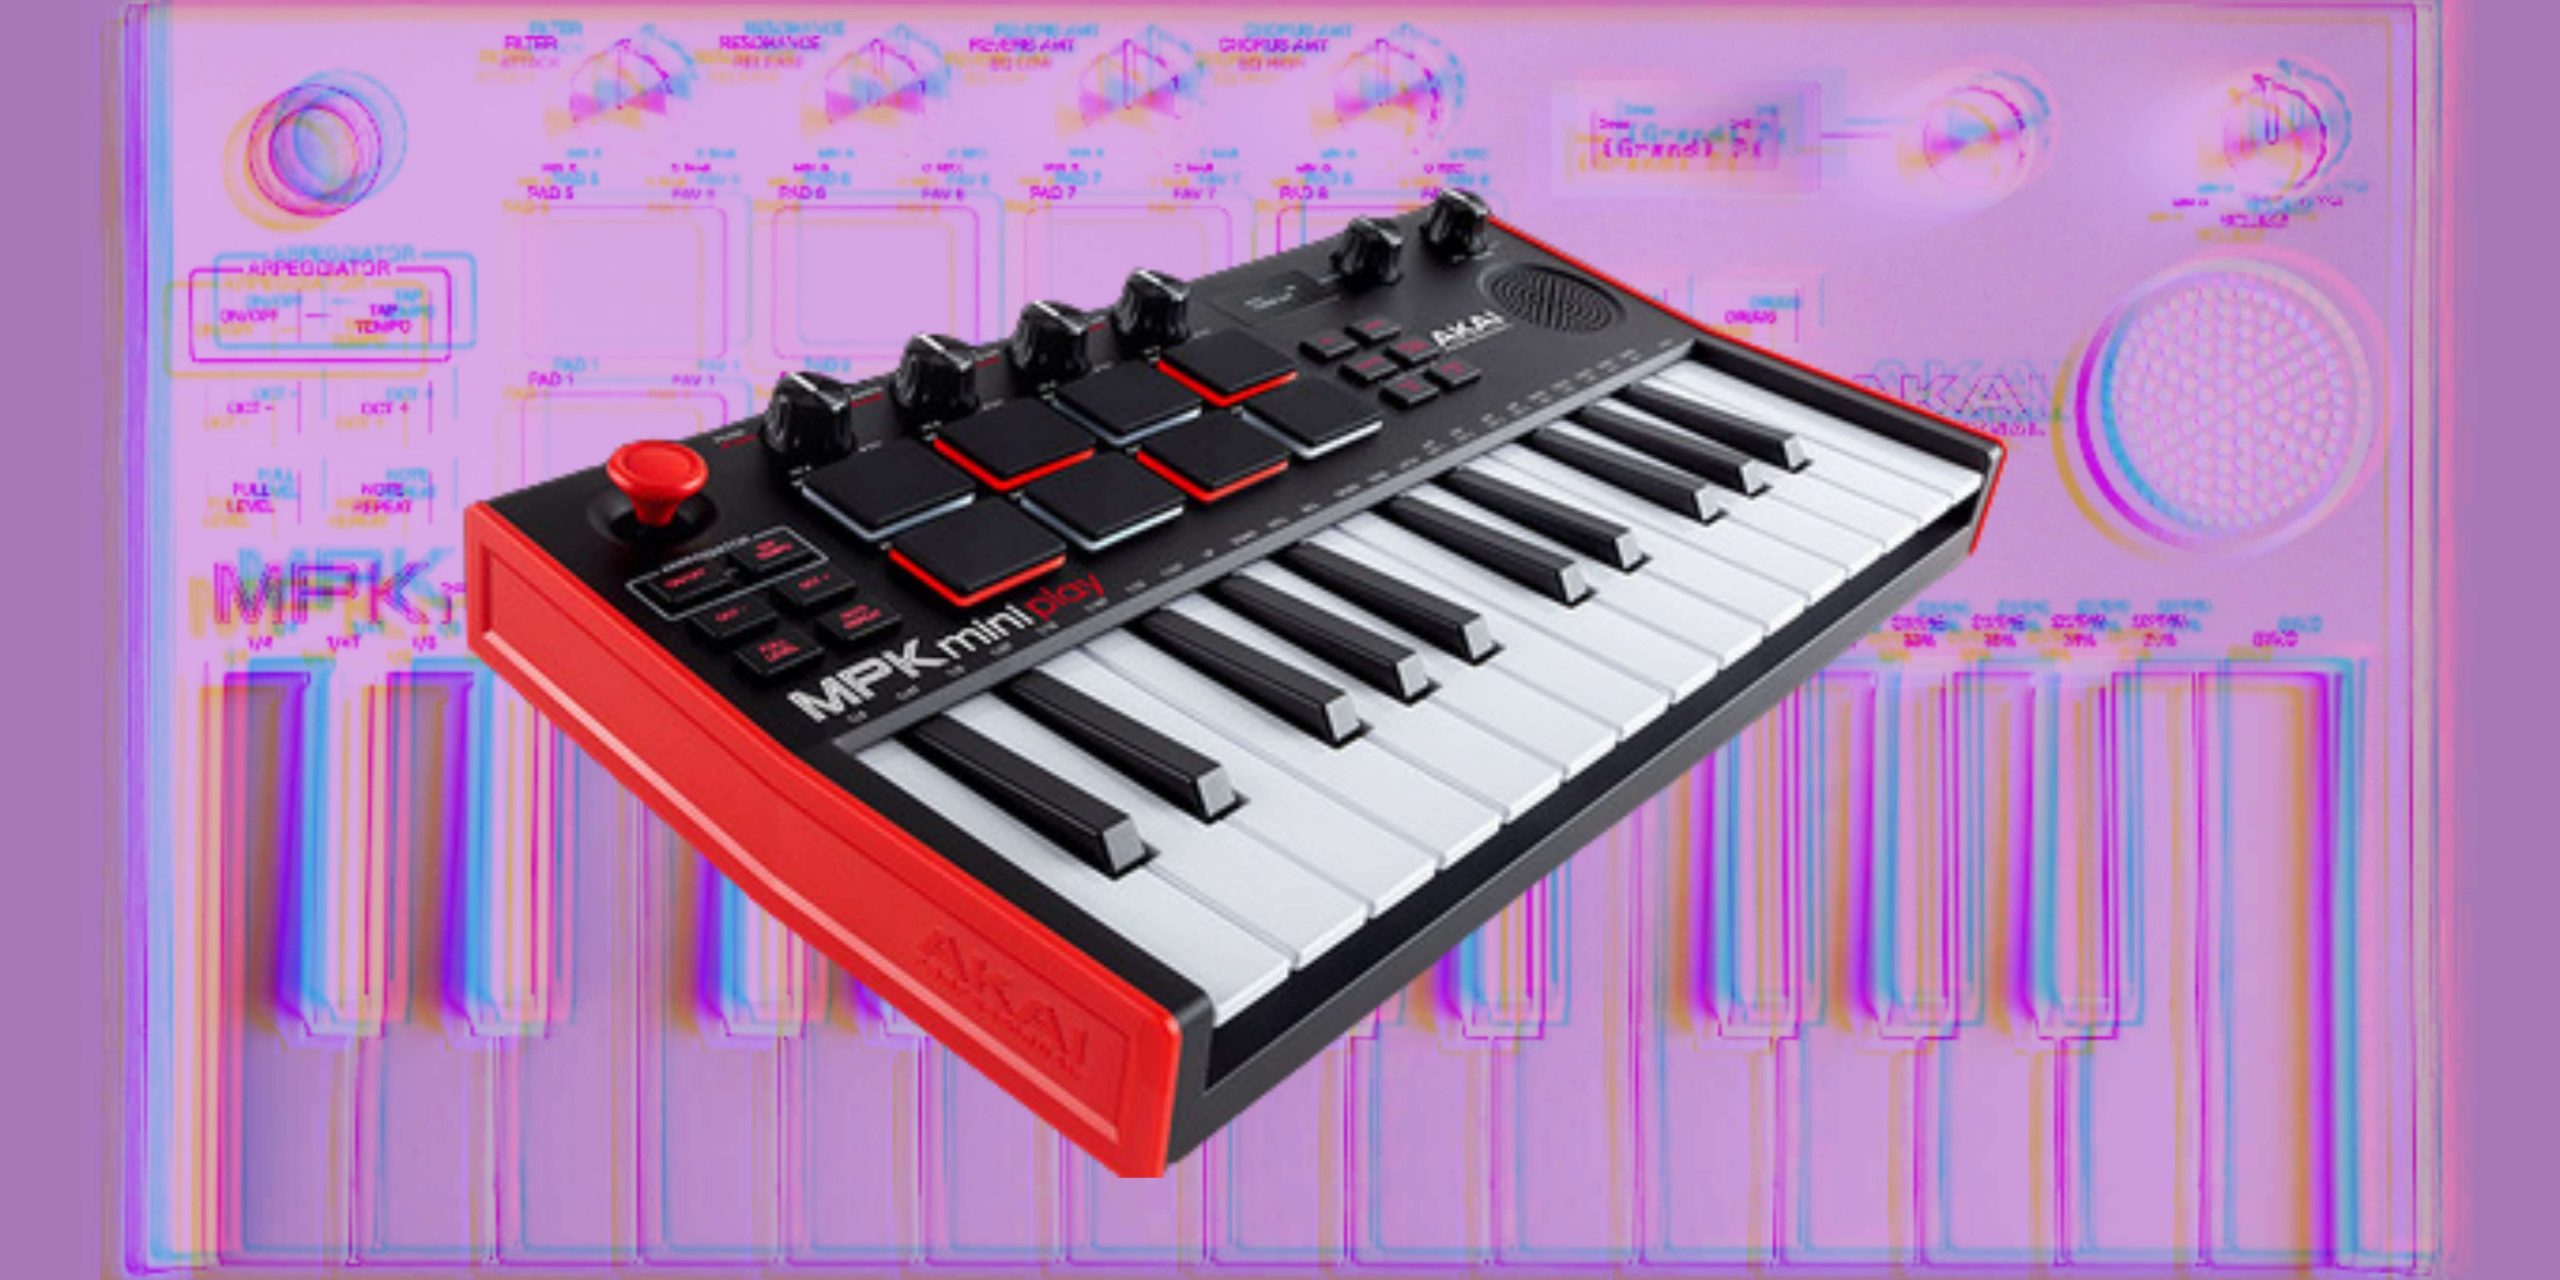 AKAI MPK Mini Play mk3 is A Keyboard Controller With Sounds and a